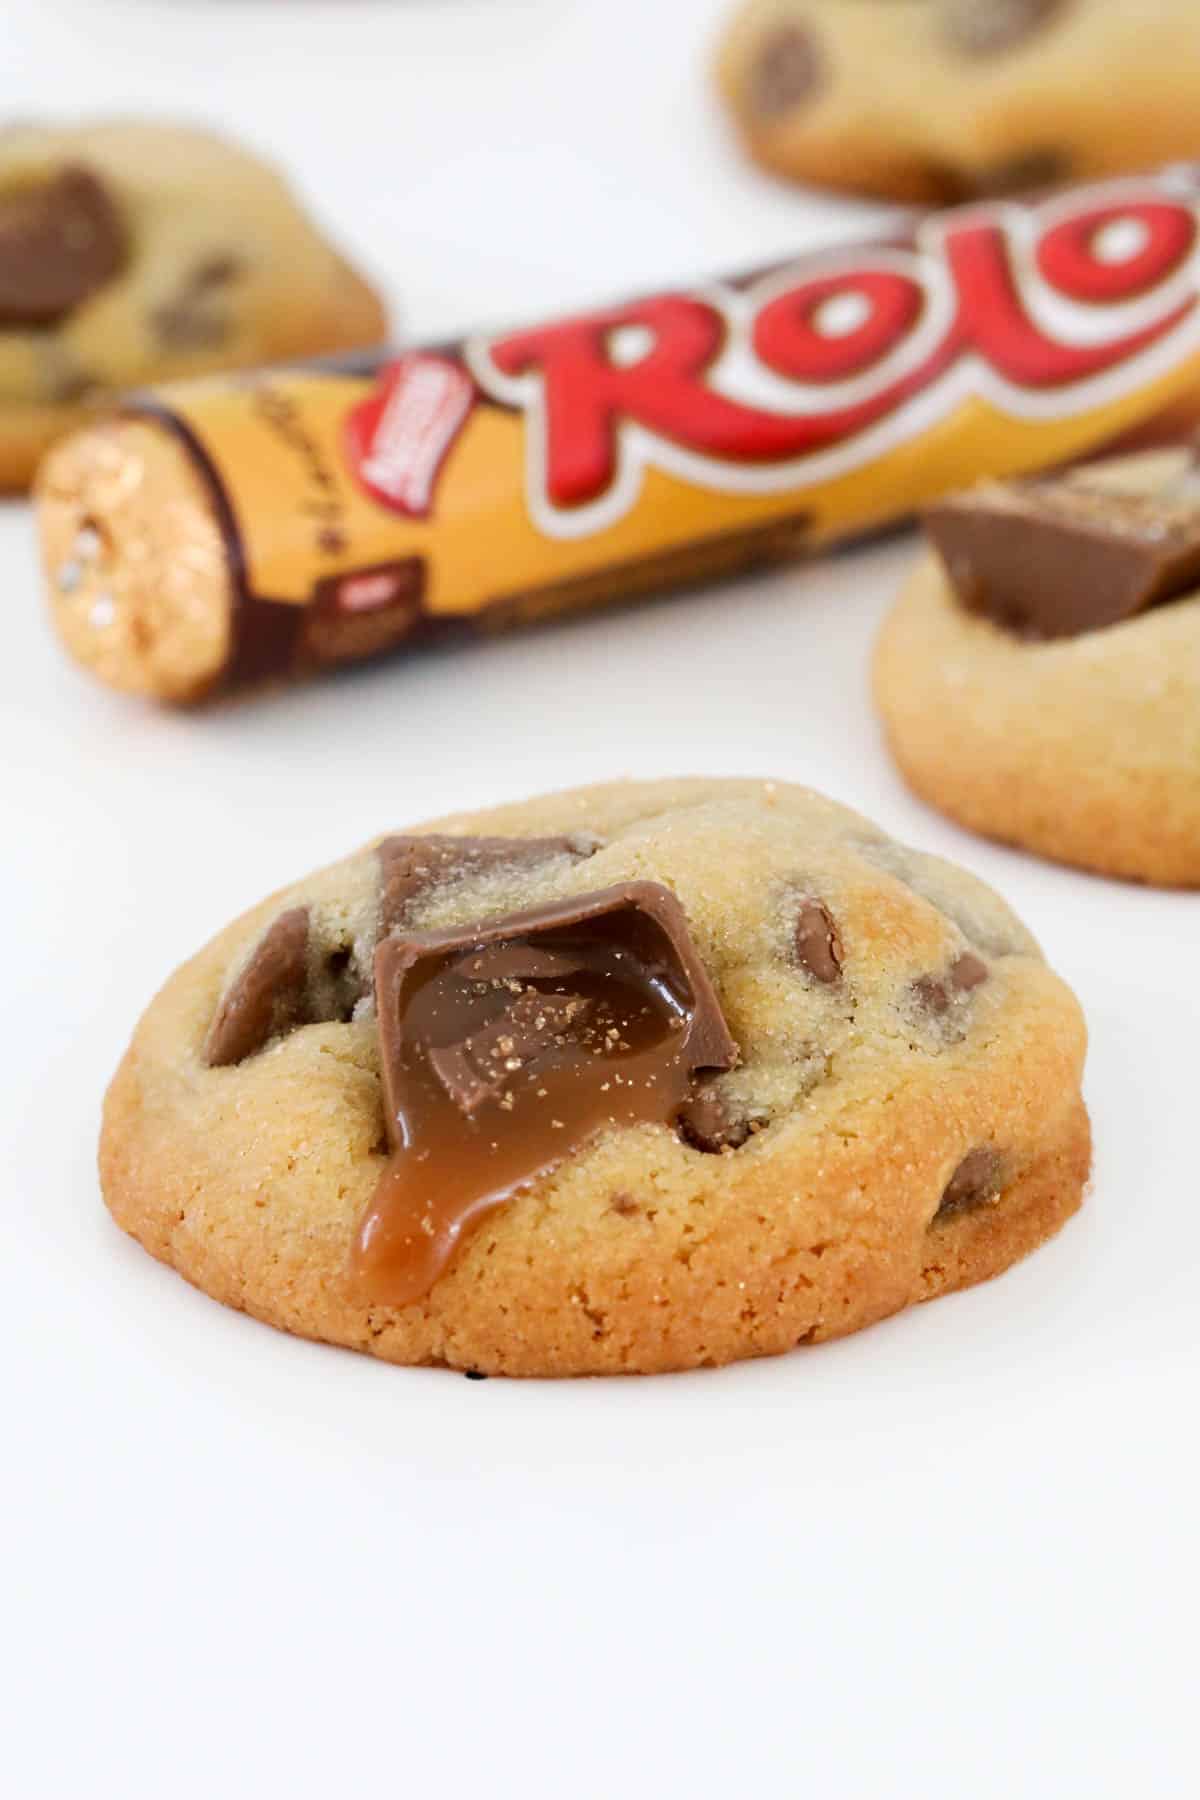 Chocolate chip cookies with gooey chocolate caramels spilling out.